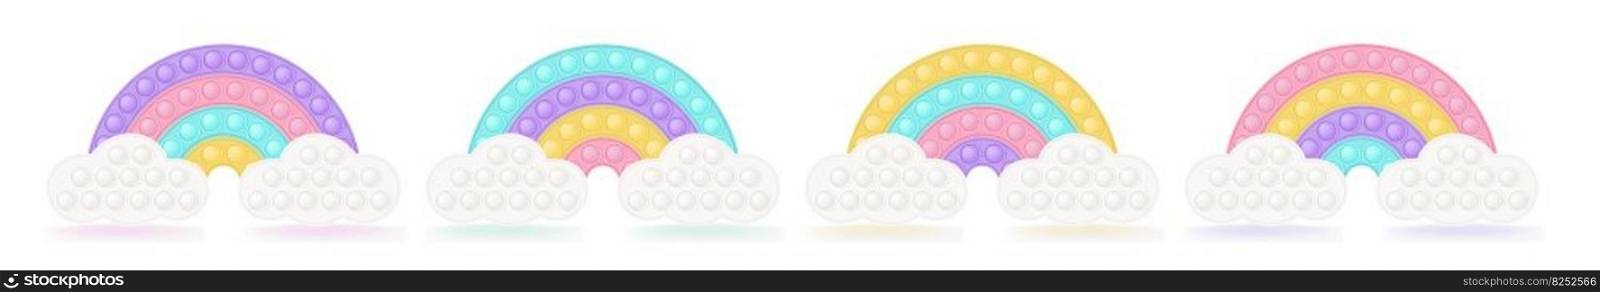 Set of popit rainbows on the clouds as a fashionable silicon fidget toys. Antistress toy for fidget in pastel colors. Bubble sensory popit toy. Vector illustration isolated on a white background. Set of popit rainbows on the clouds as a fashionable silicon fidget toys. Antistress toy for fidget in pastel colors. Bubble sensory popit toy. Vector illustration isolated on a white background.